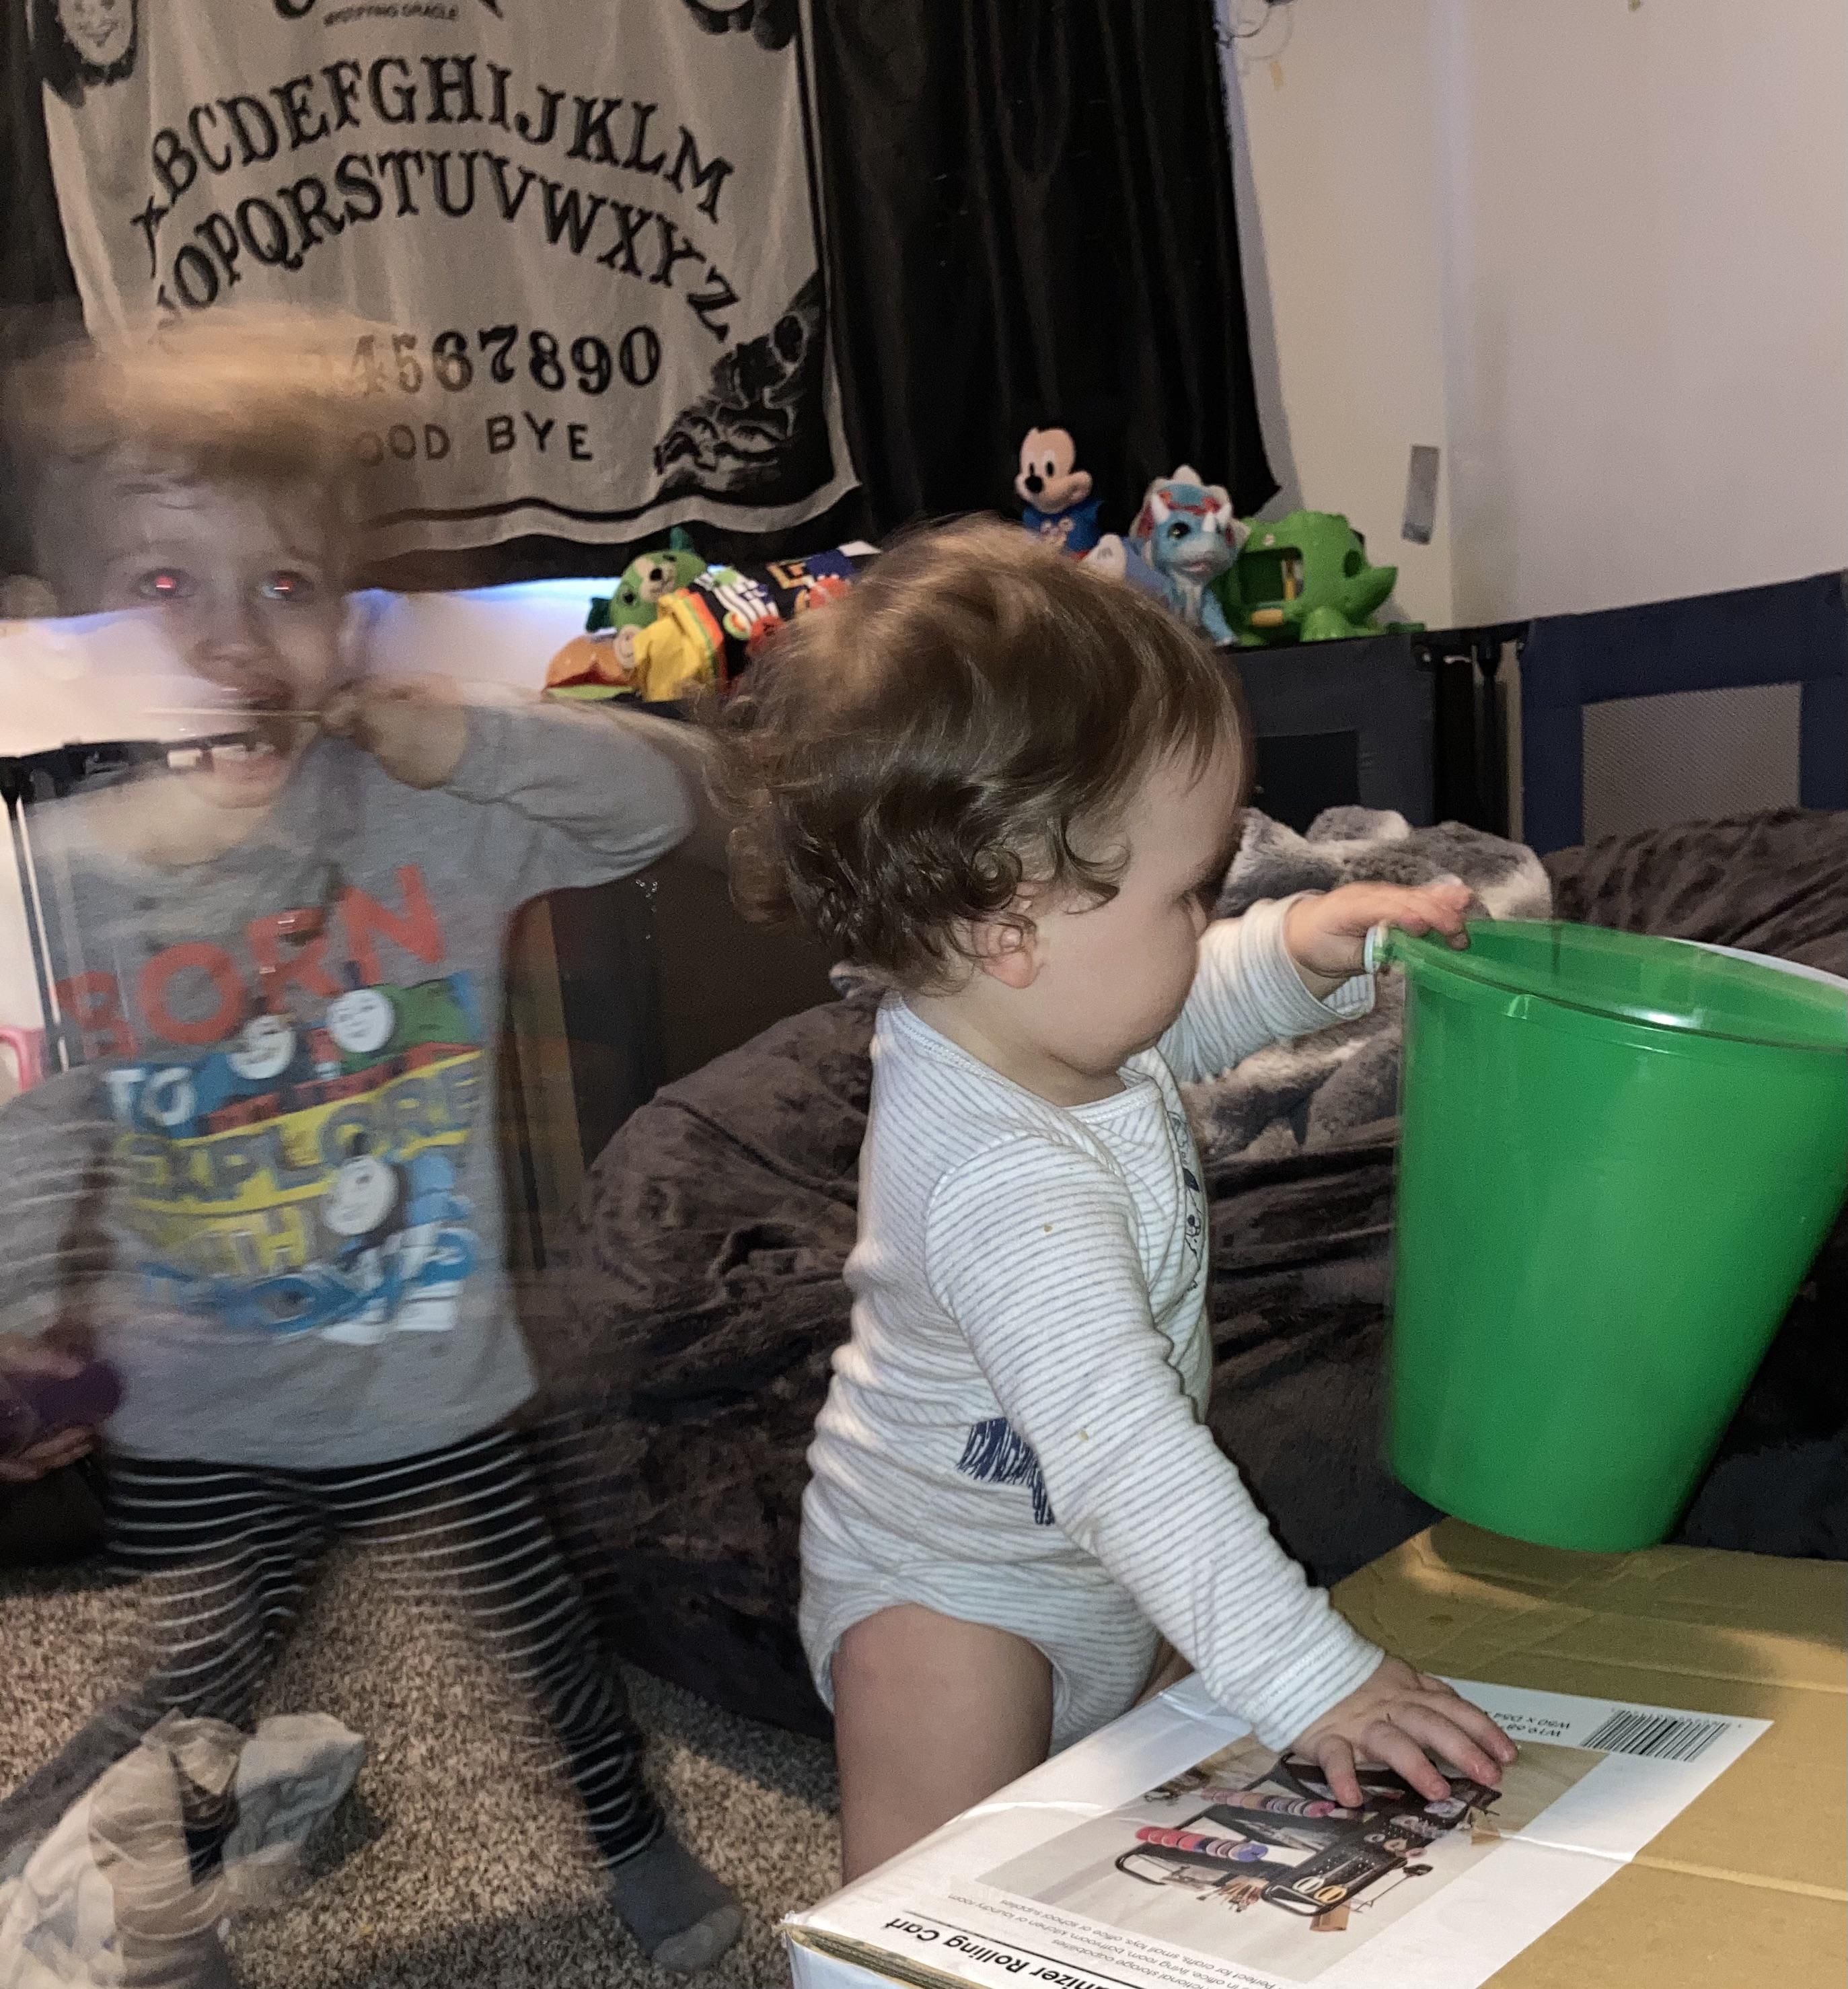 Tried to take a cute picture of my sons, but the oldest decided to go to another dimension